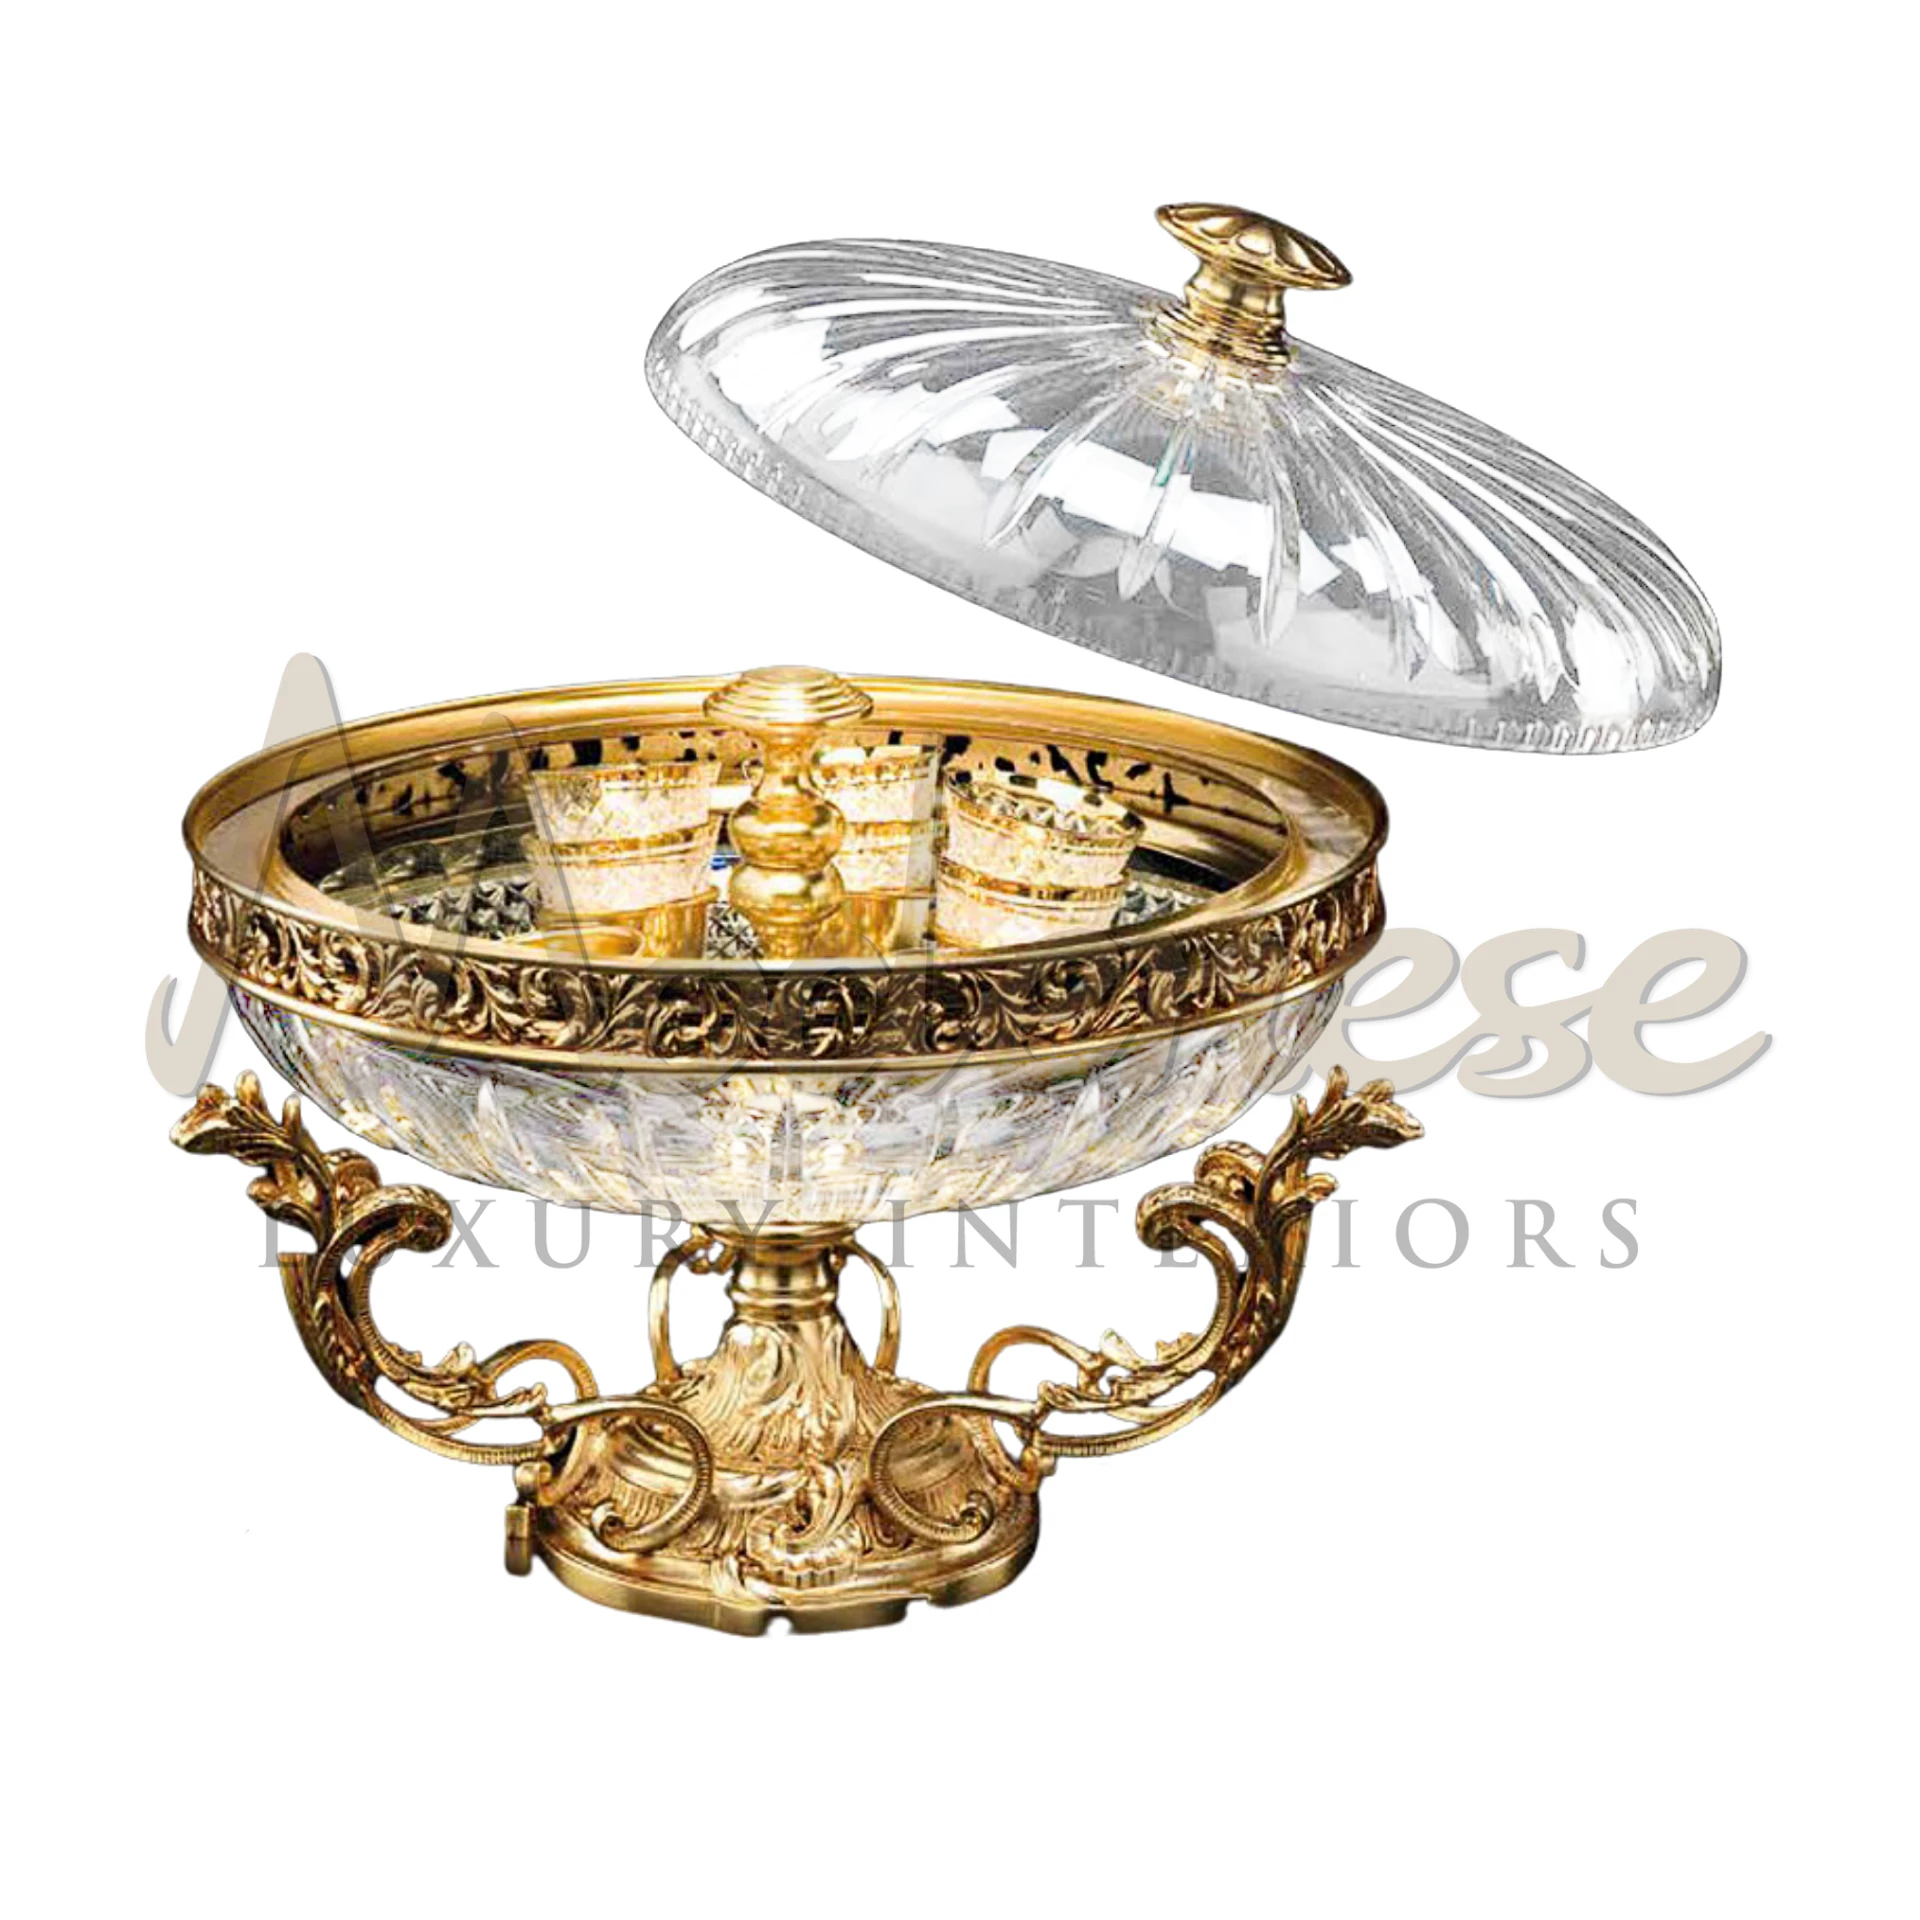 Modenese Classical Luxury Closed Bowl, a blend of traditional design and luxury craftsmanship, perfect for elegant interiors.